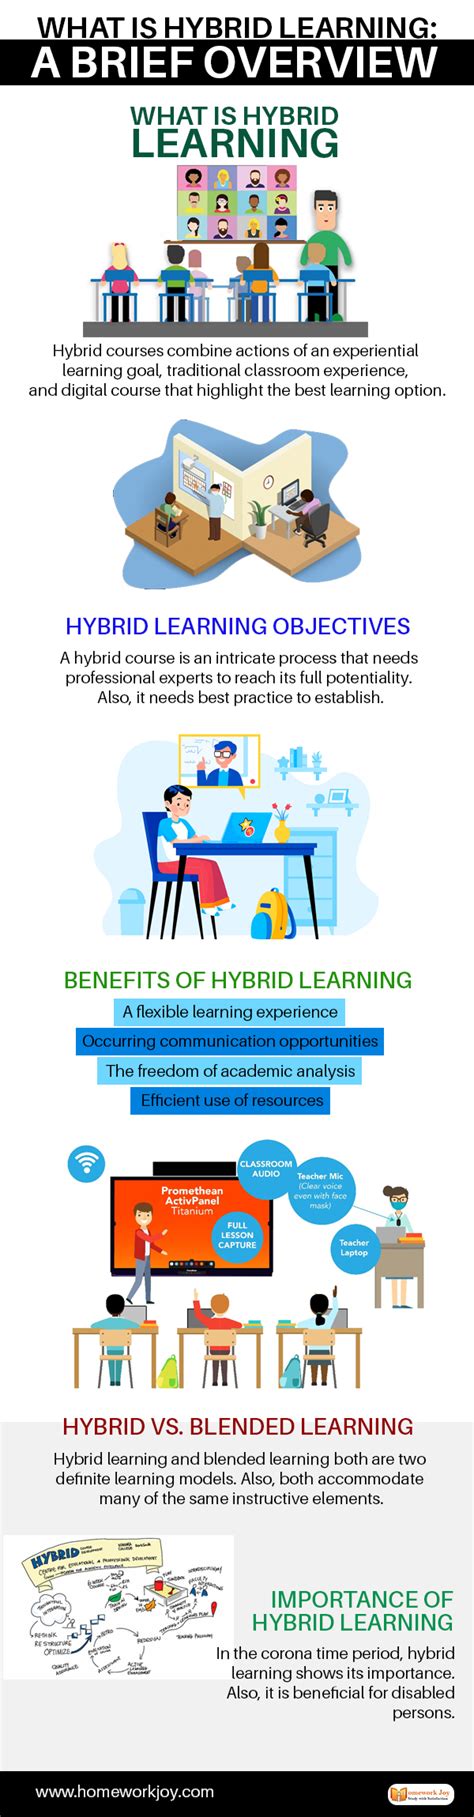 What Is Hybrid Learning A Brief Overview